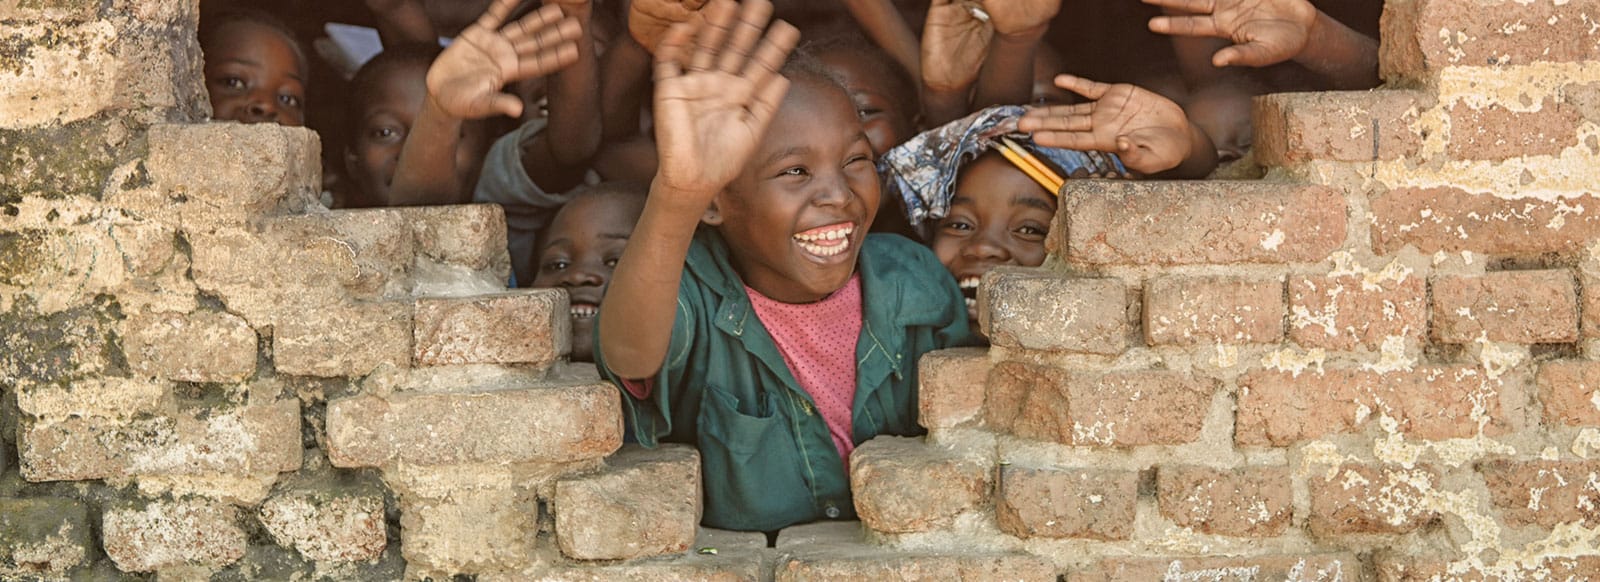 An image of children crowding to an opening in a brick wall to wave as someone goes by, all smiling happily.